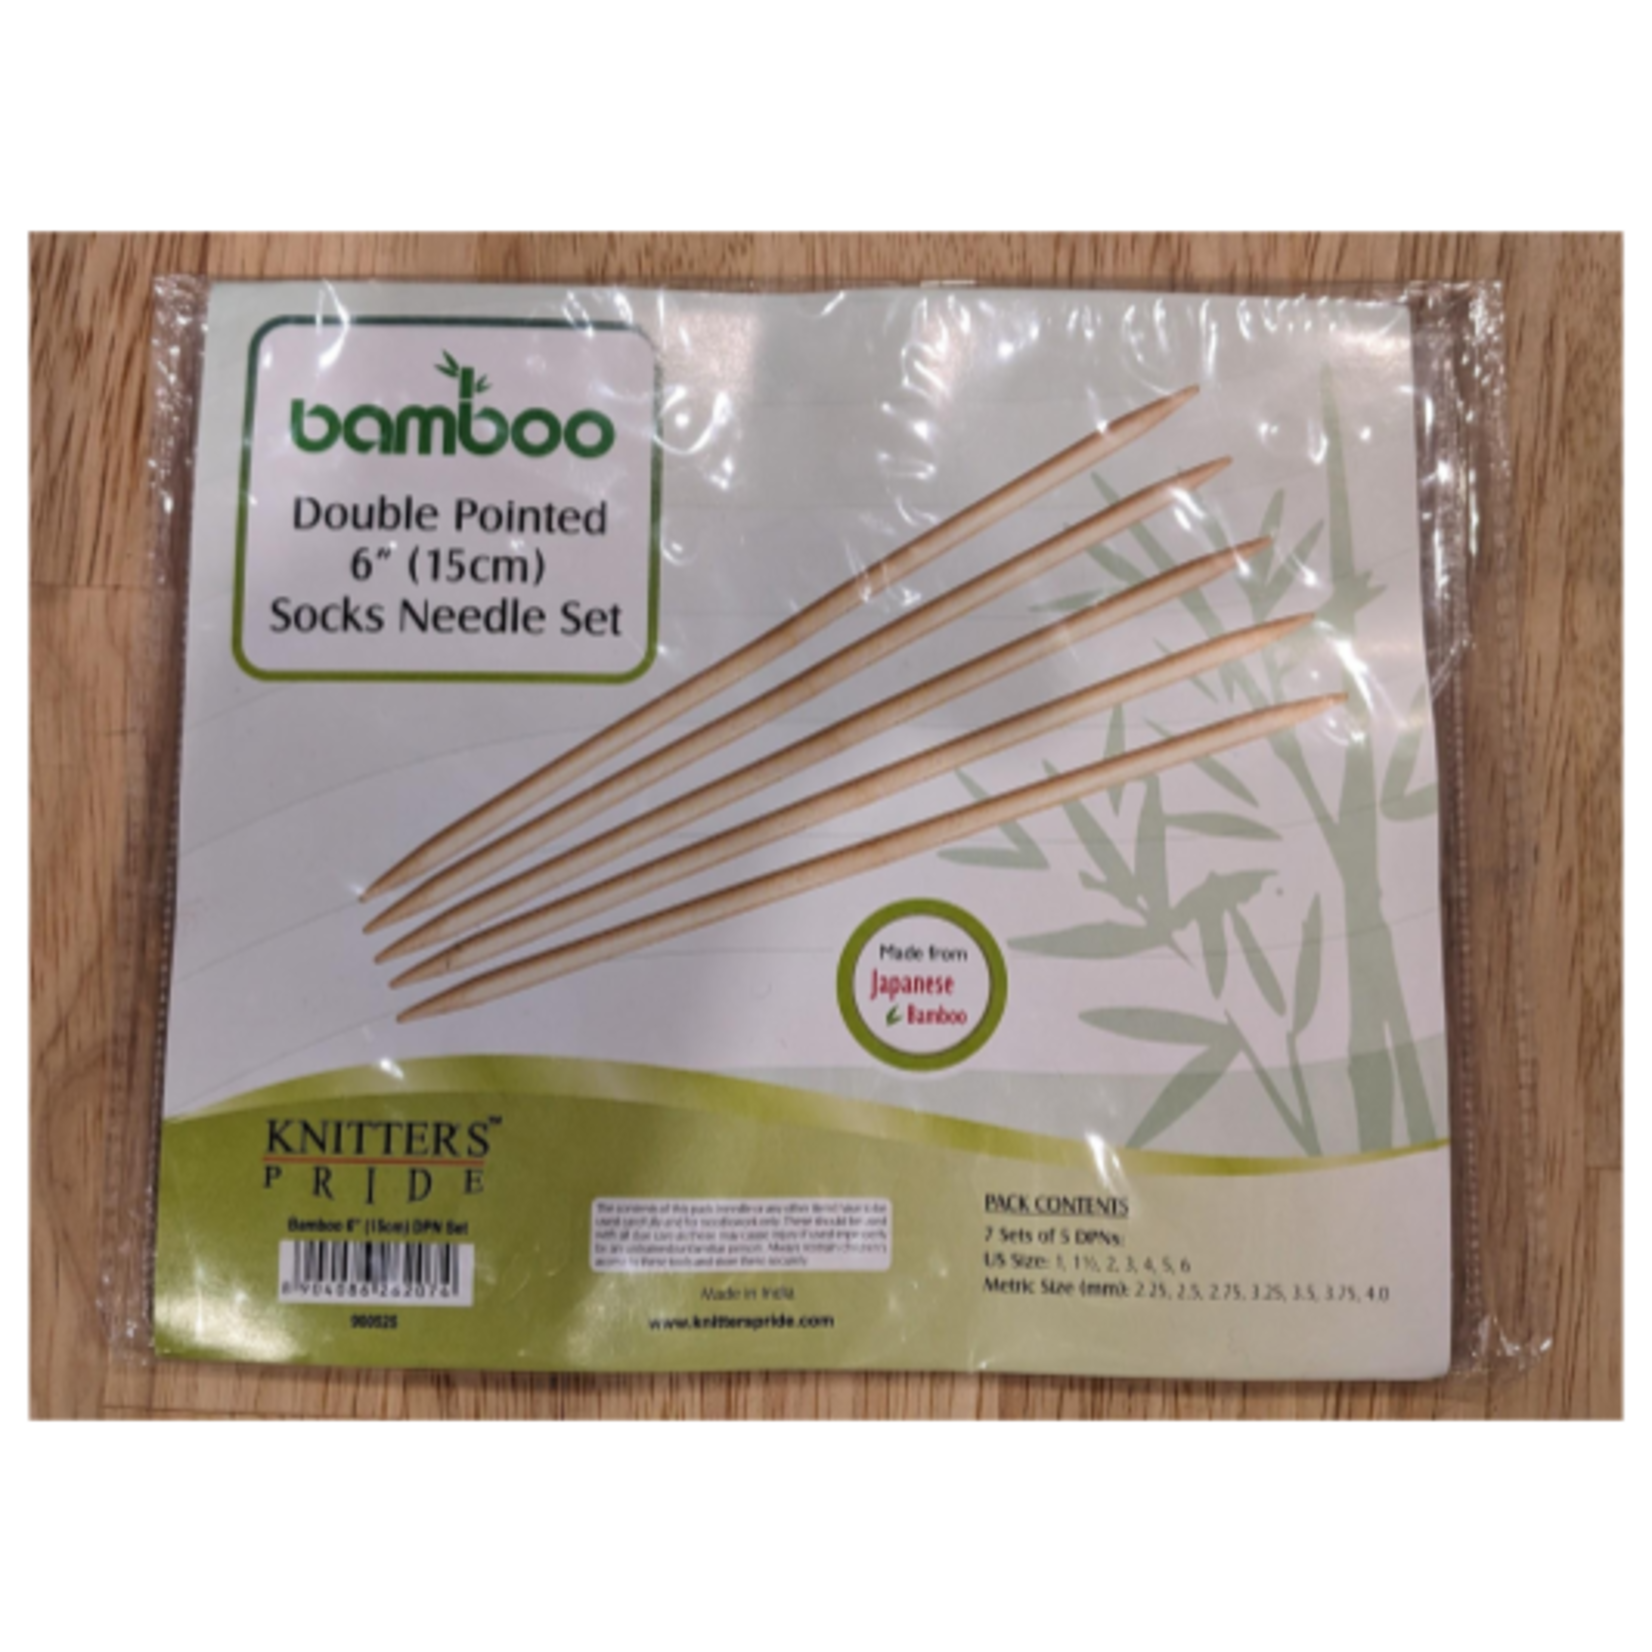 Knitter's Pride Bamboo Double Pointed Needle Set